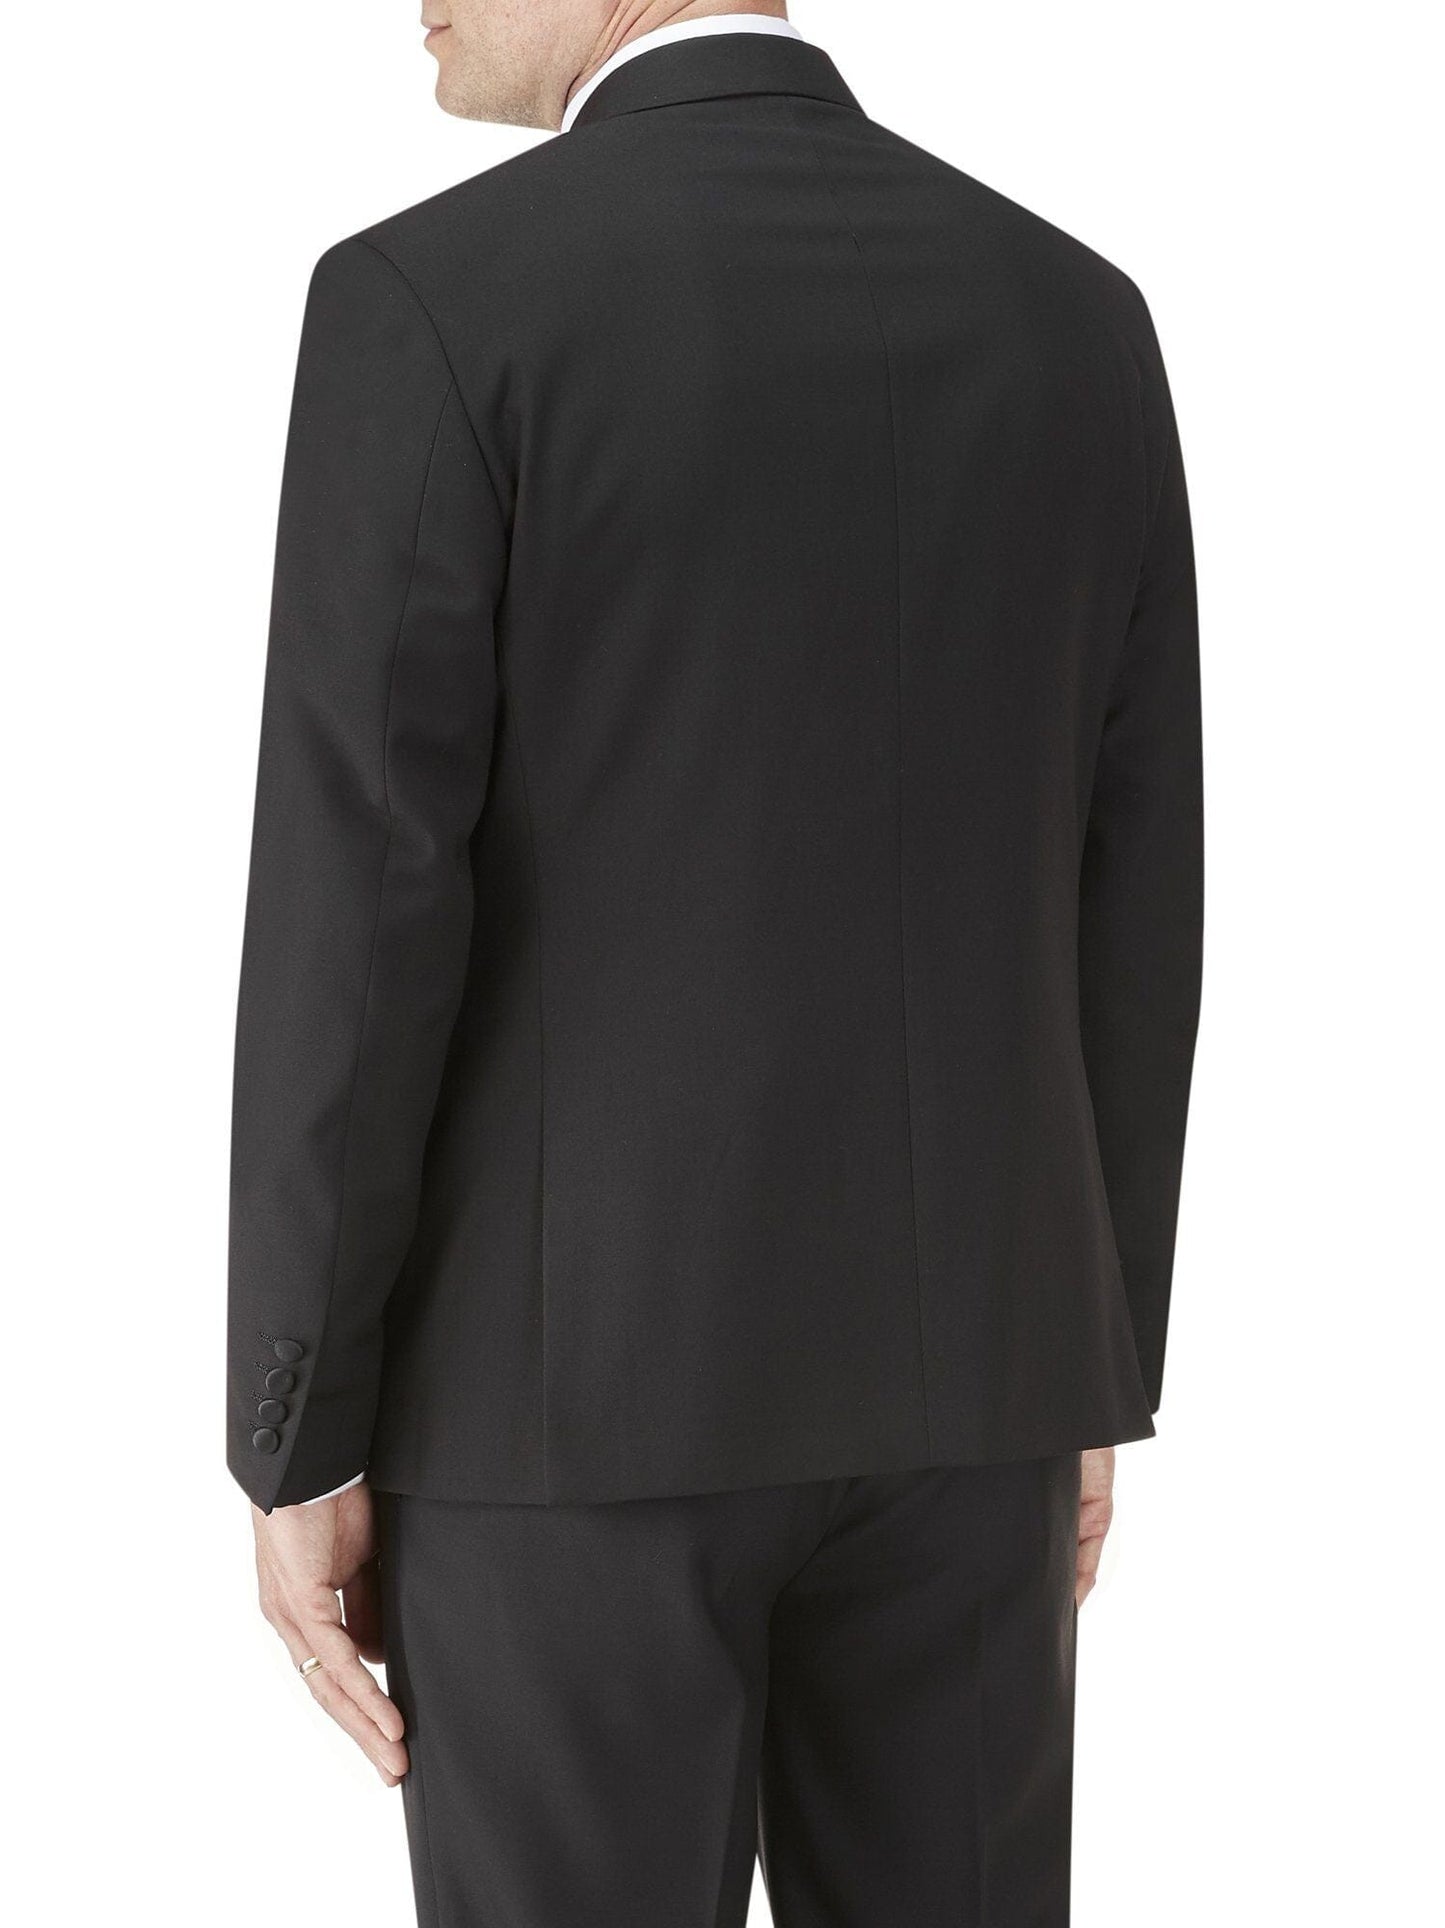 Sinatra Double Breasted 2 Piece Black Dinner Suit - Suits - - THREADPEPPER